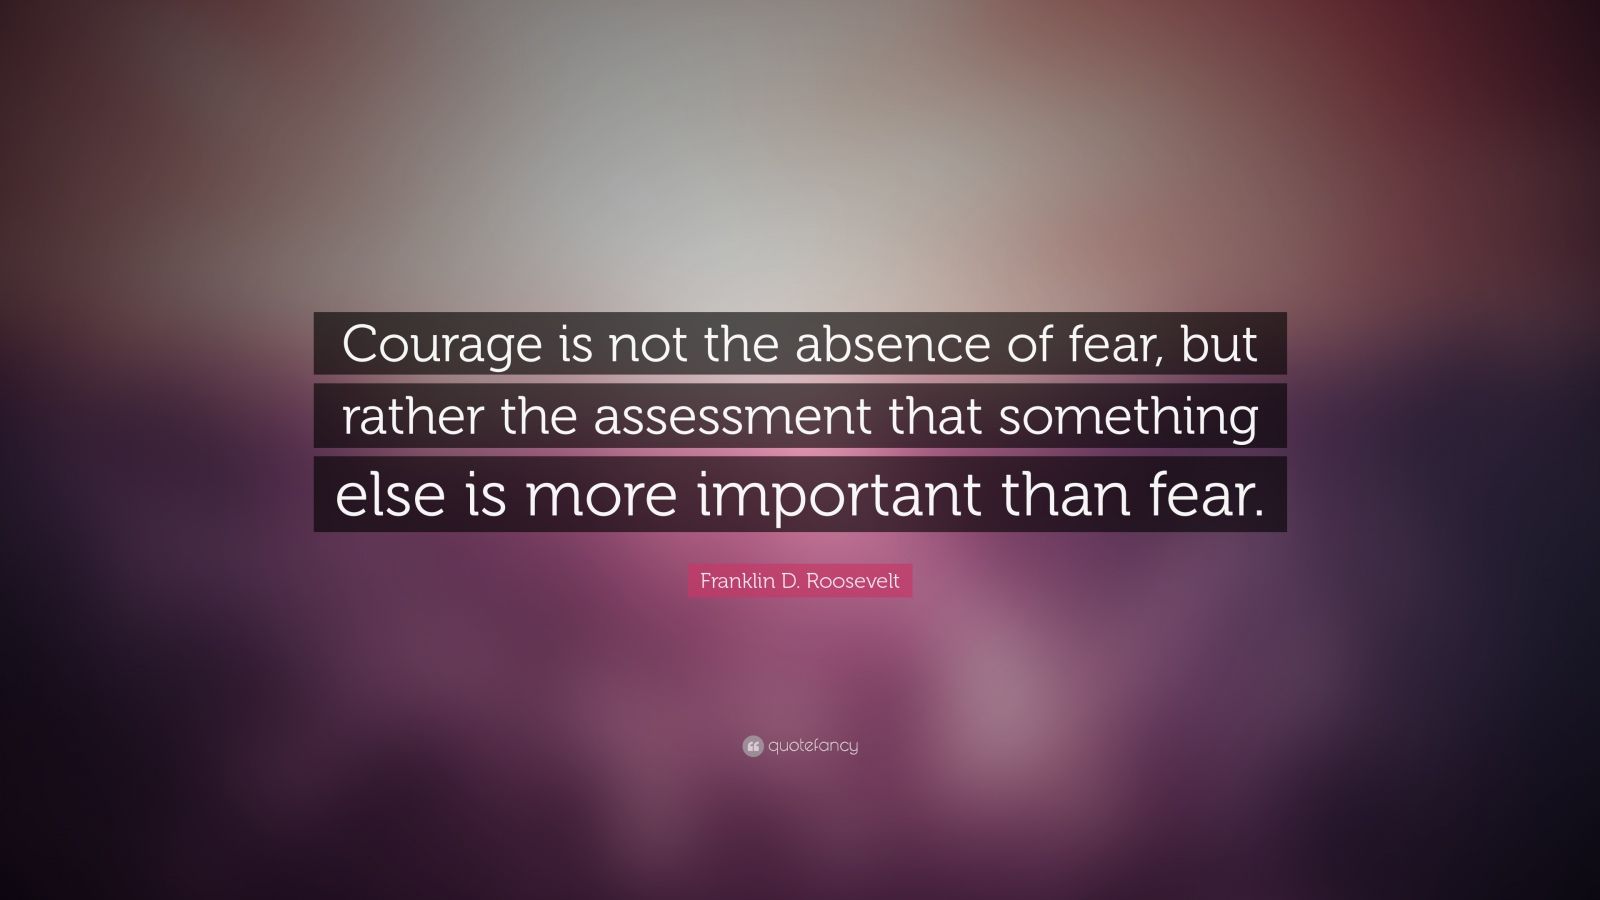 Franklin D. Roosevelt Quote: “Courage is not the absence of fear, but